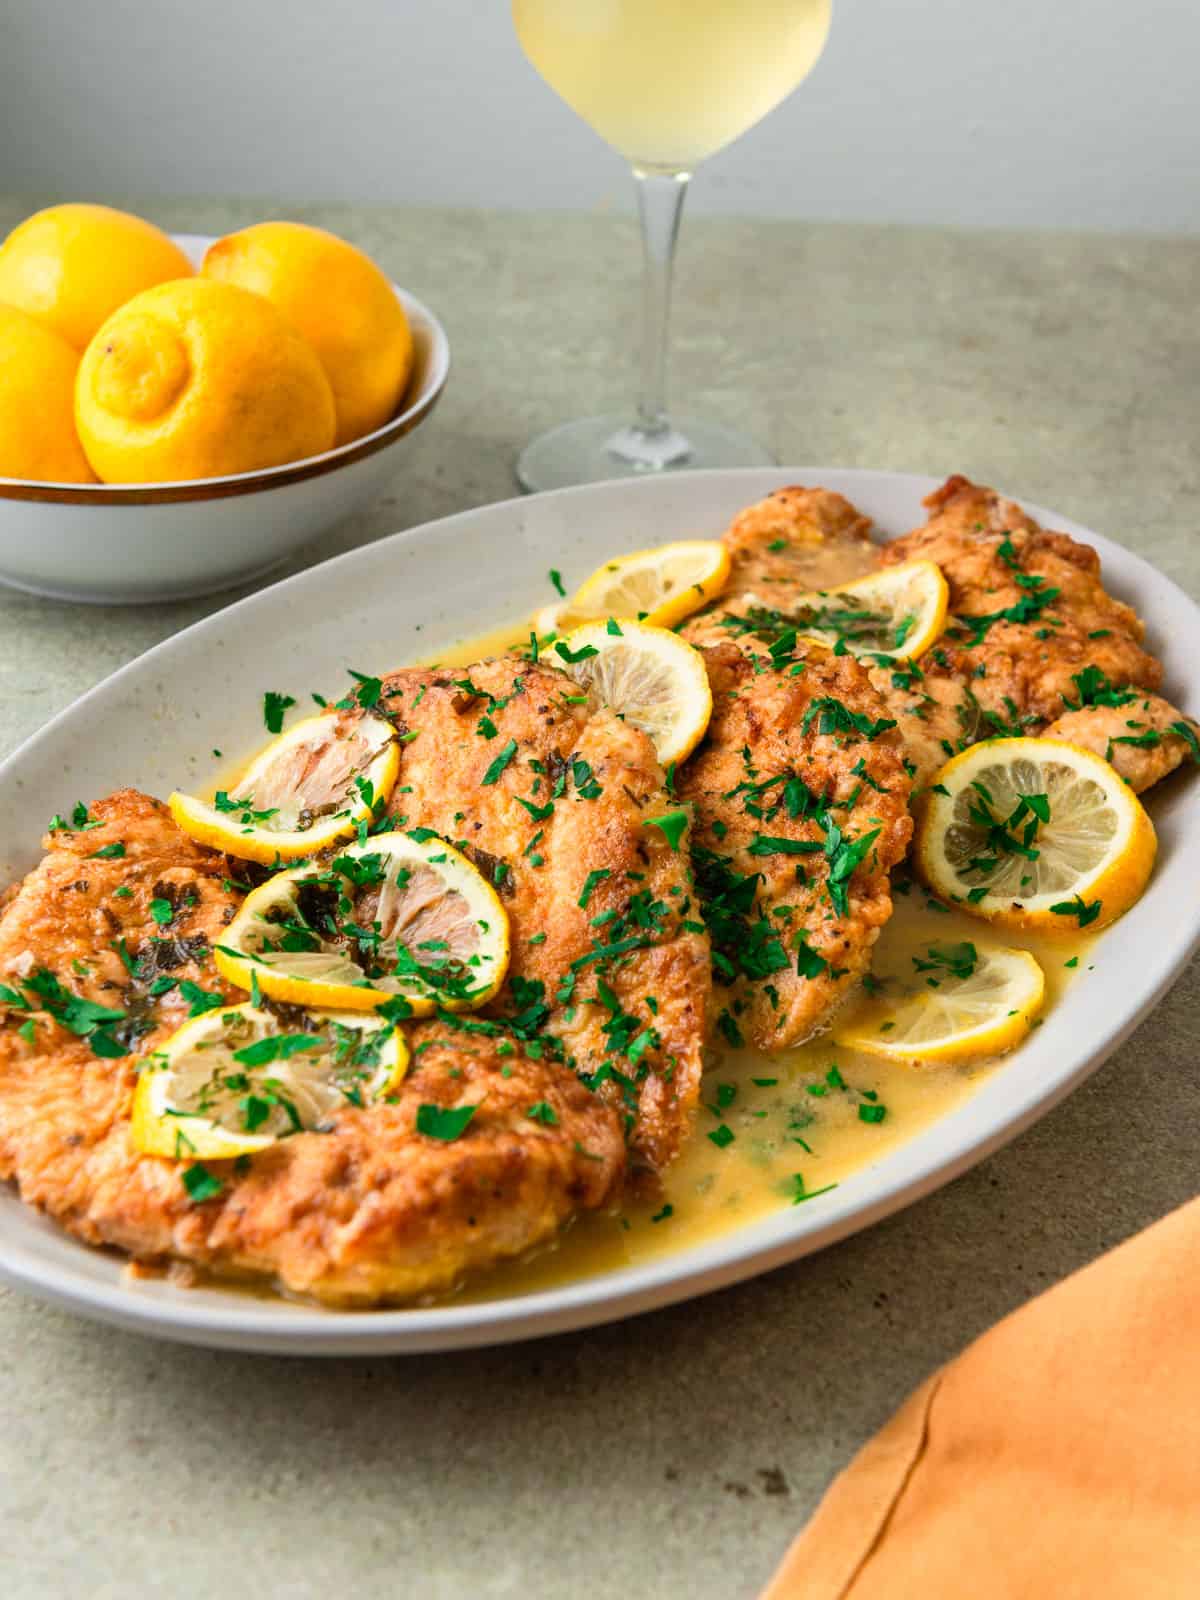 Lemony chicken francese with white wine and butter.